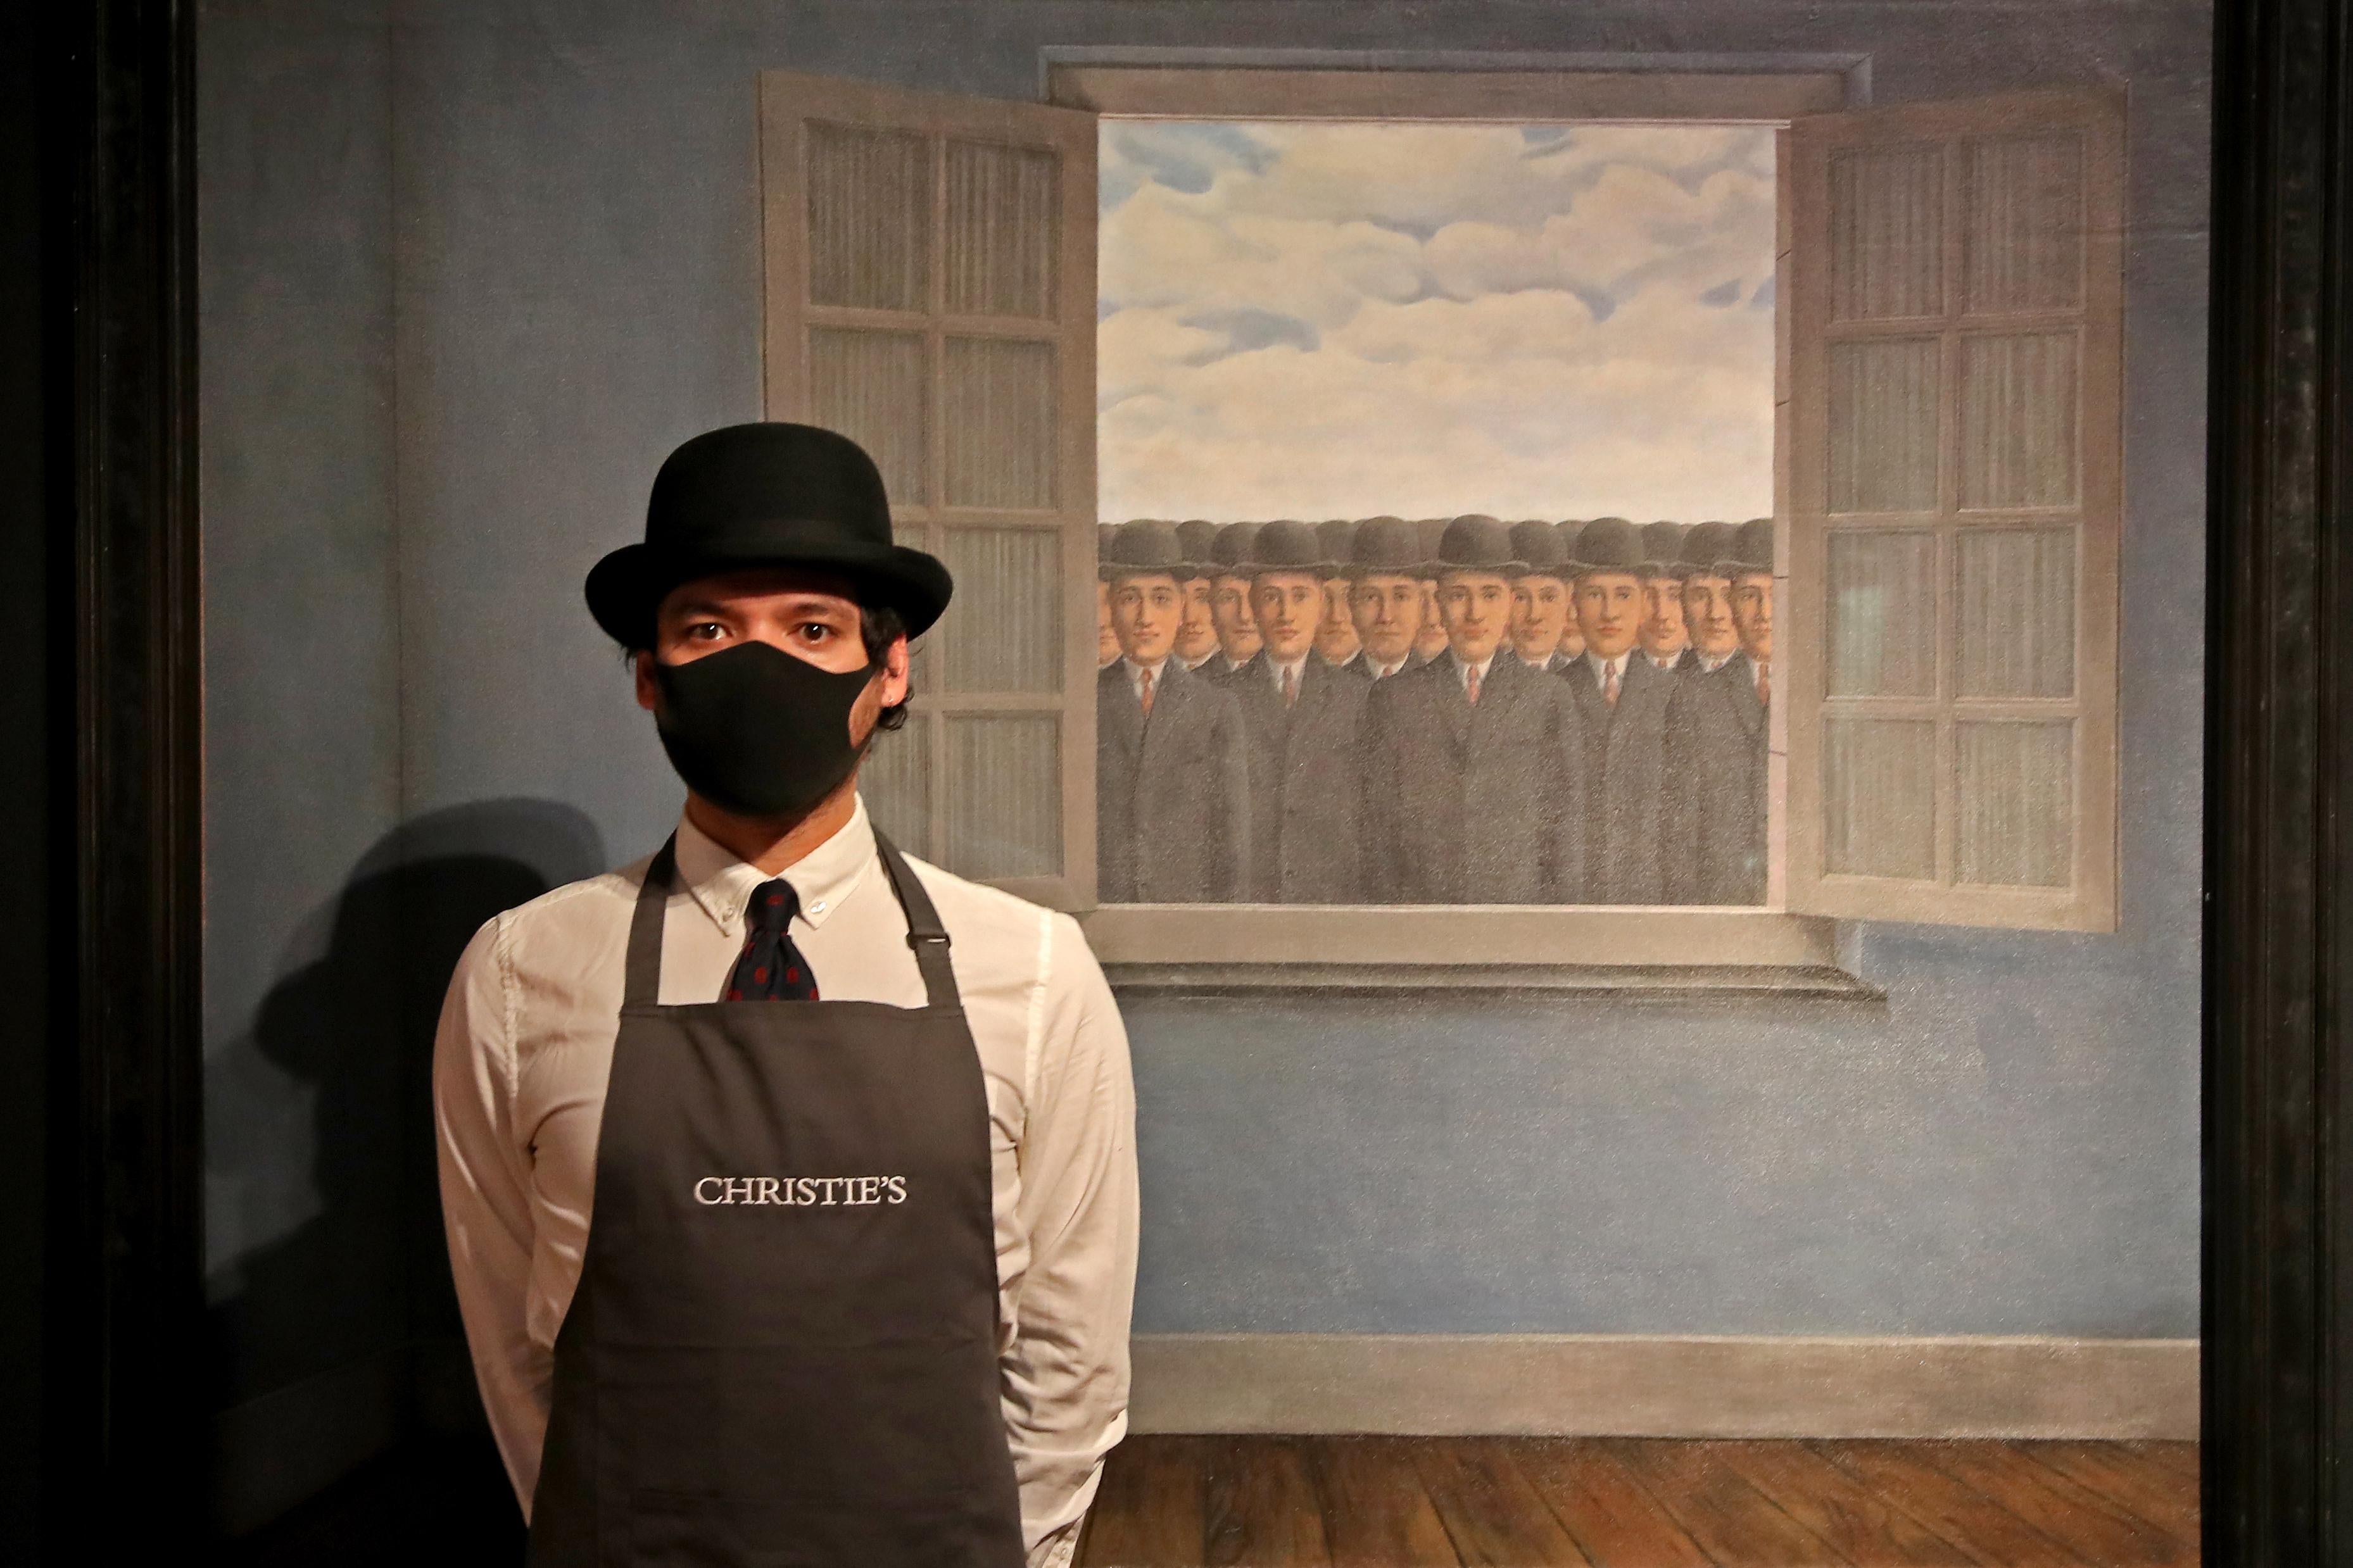 An art worker wearing a bowler hat and a Christie's apron stands next to René Magritte's "Le mois des vendanges" painting, which features an infinite number of men wearing bowler hats peering in an open window.